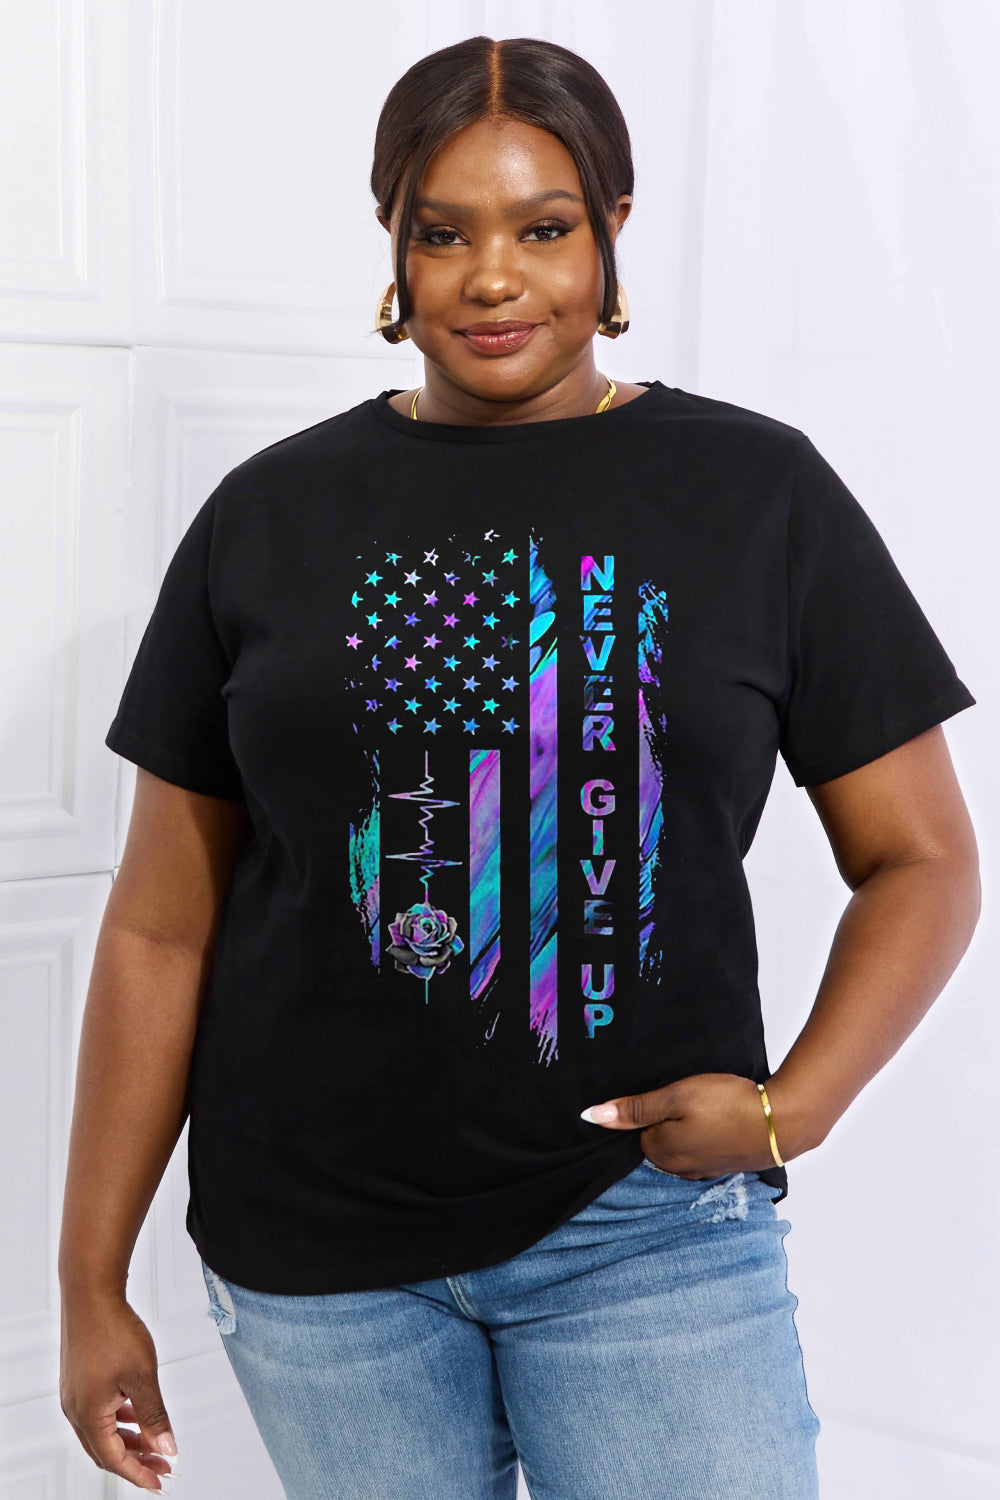 NEVER GIVE UP Graphic Cotton Tee - T-Shirts - Shirts & Tops - 15 - 2024